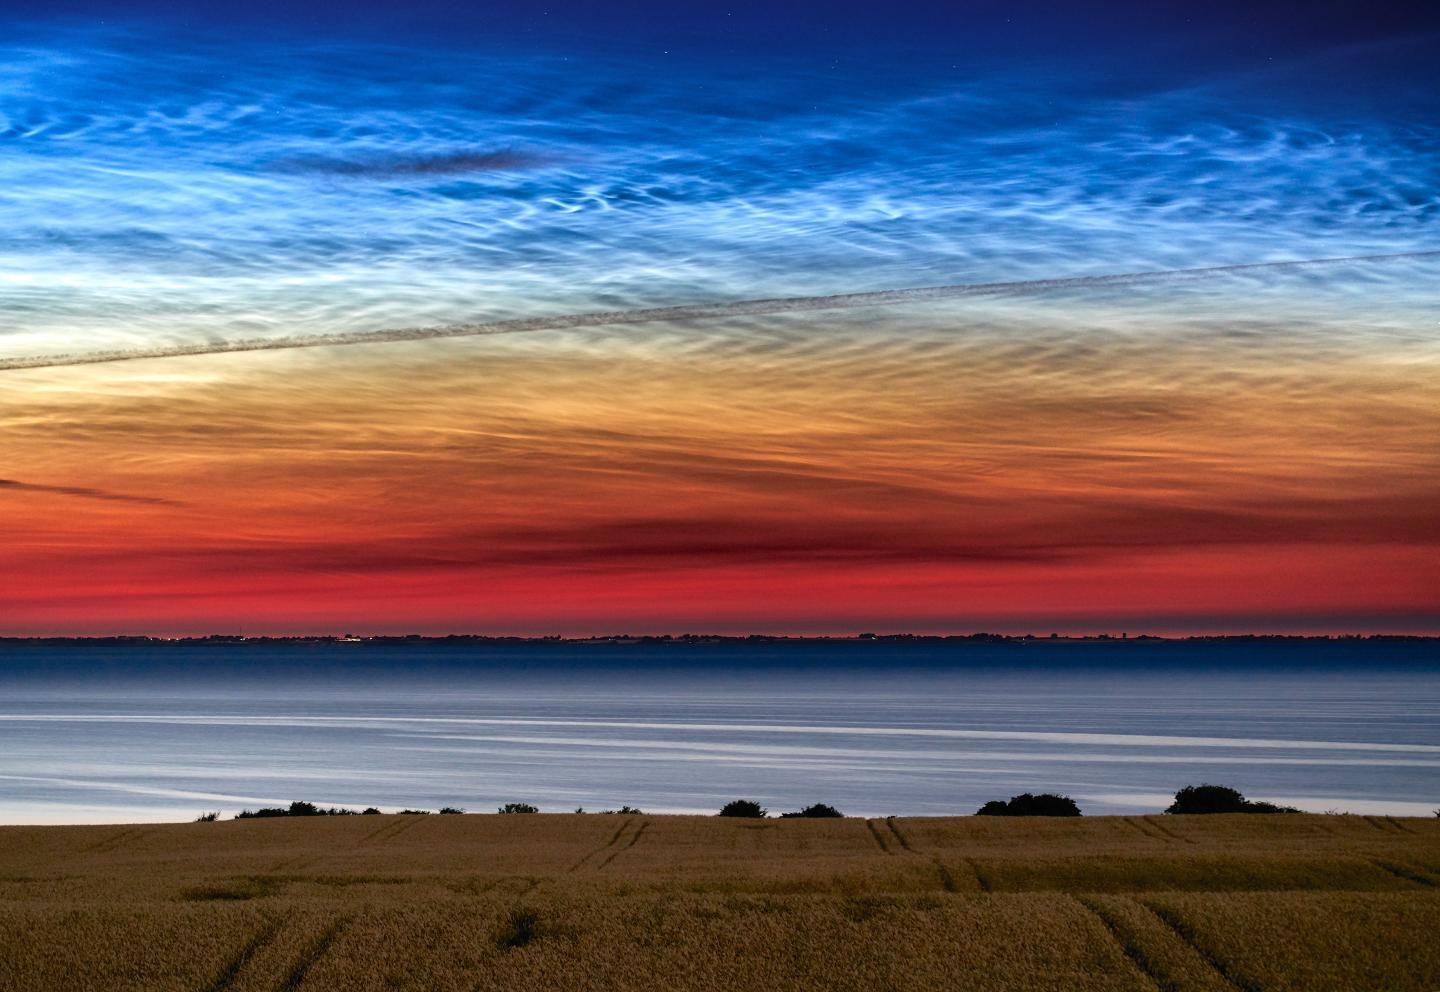 Image showing noctilucent clouds in sky above a golden field of wheat and the sea, the sky is red on the bottom, moving up to orange and through to the noctilucent clouds layer which is blue